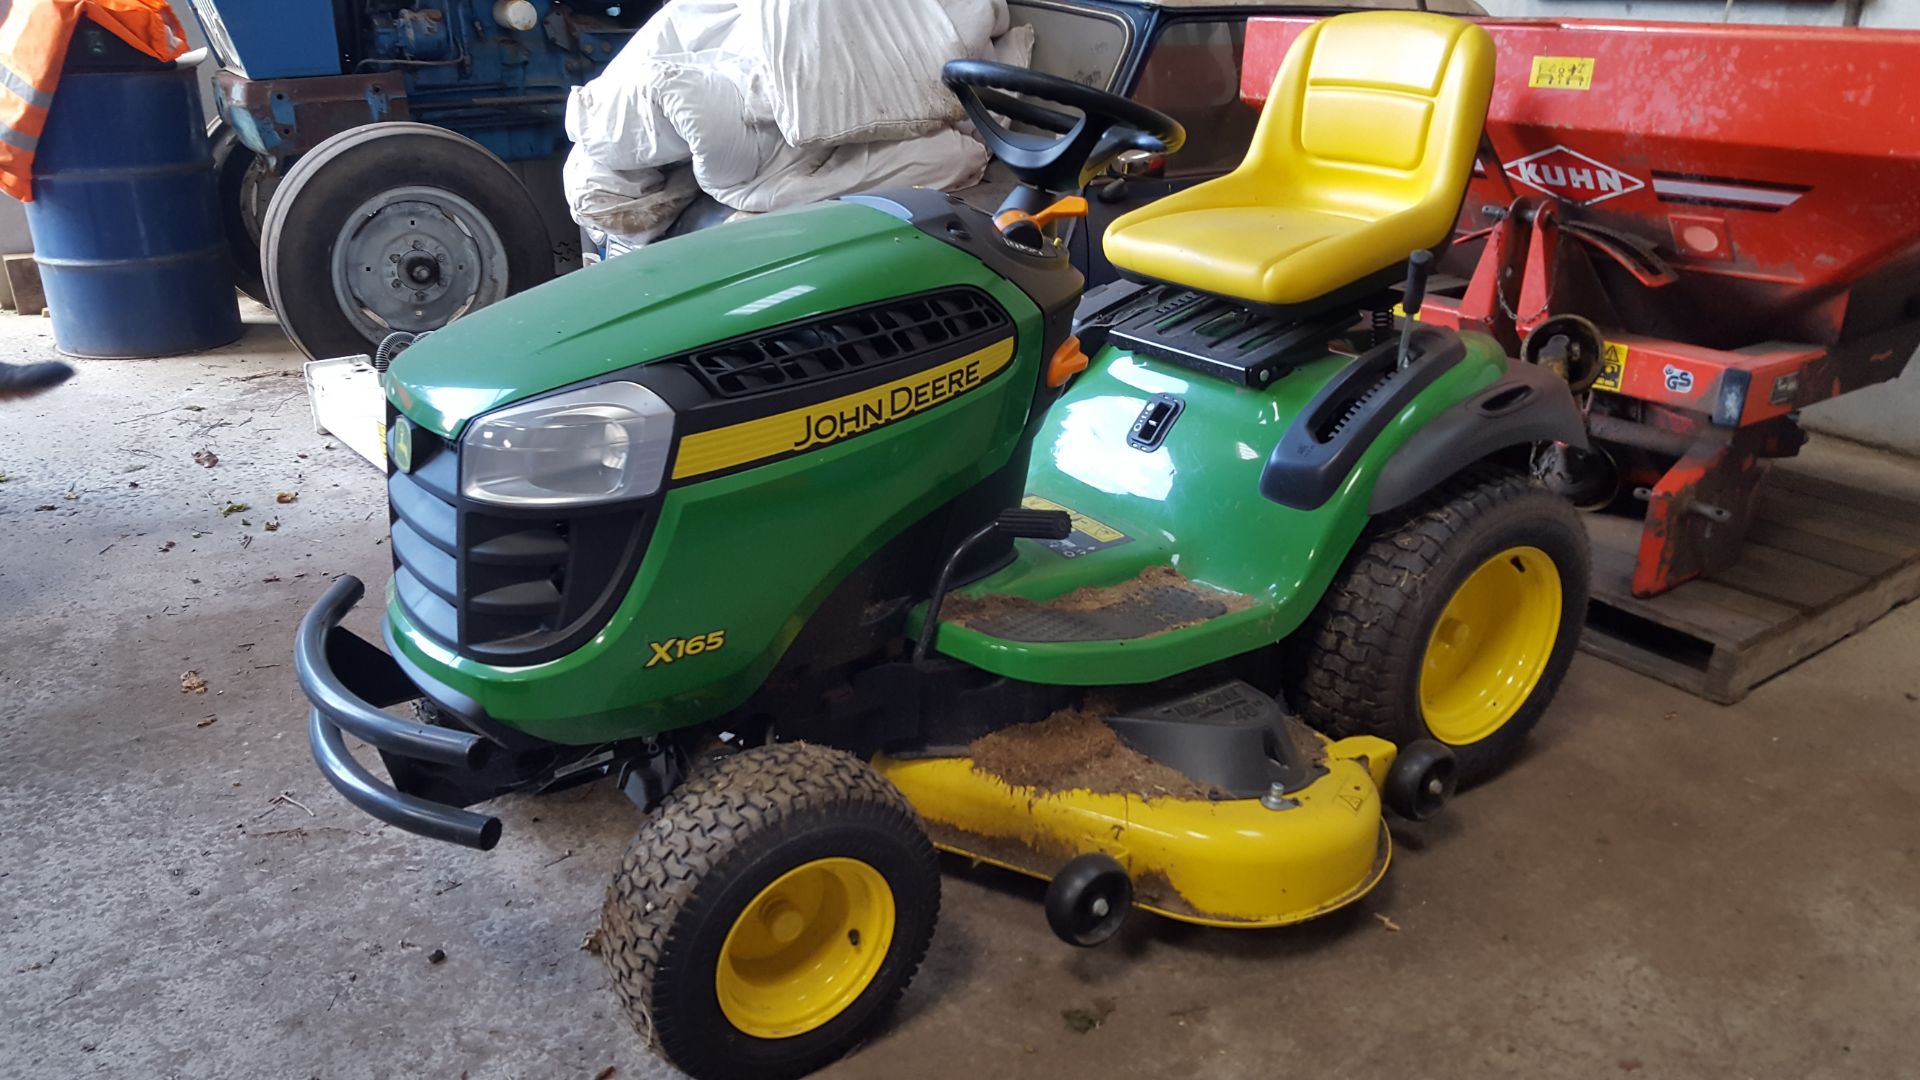 2016 John Deere X165 V Twin with 48" Mulching Deck - Image 2 of 3